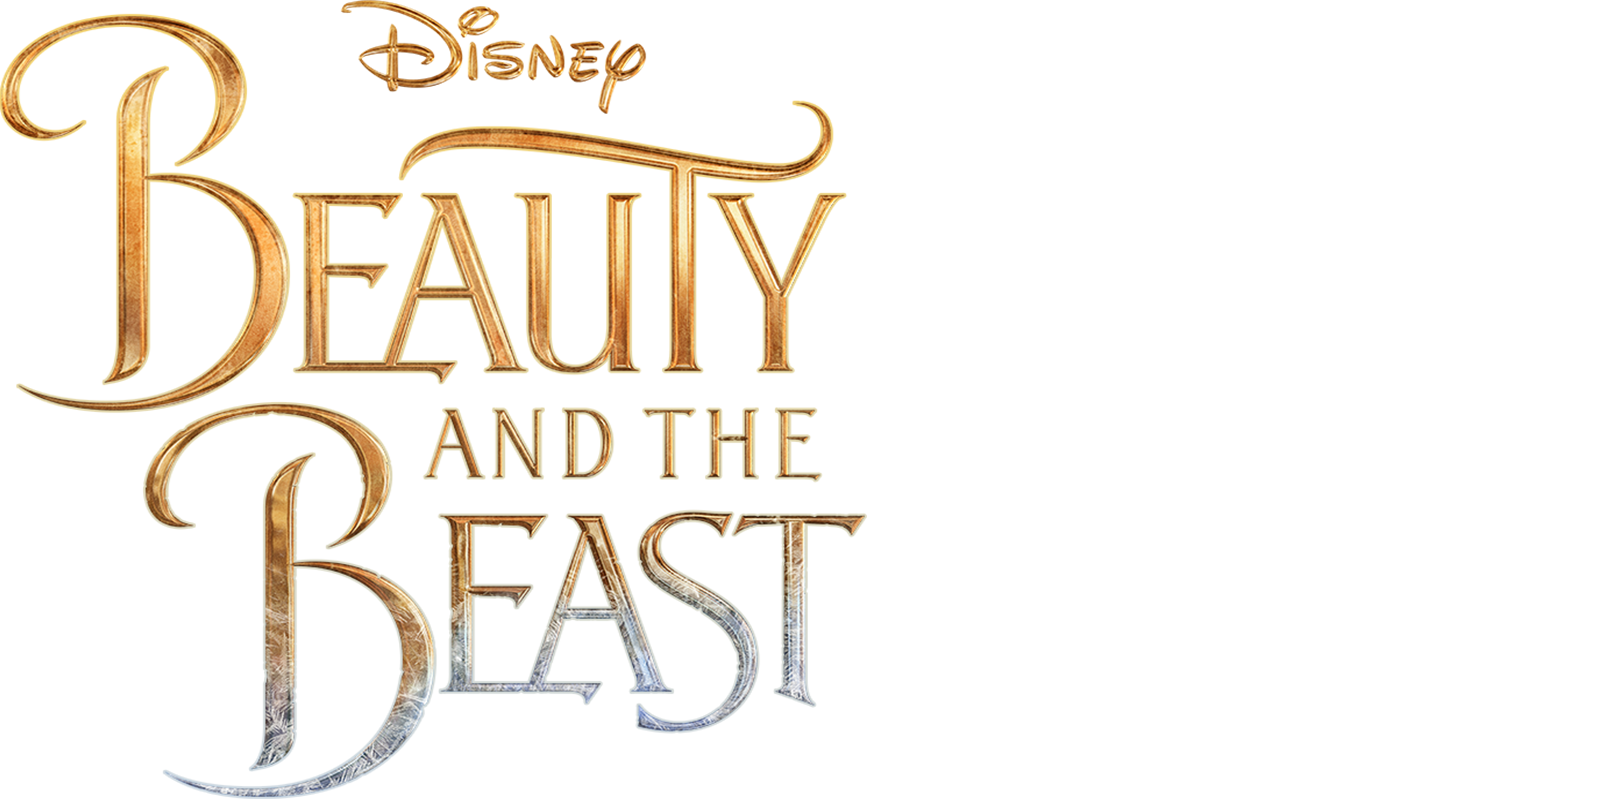 beauty and the beast 2017 full movie watch online